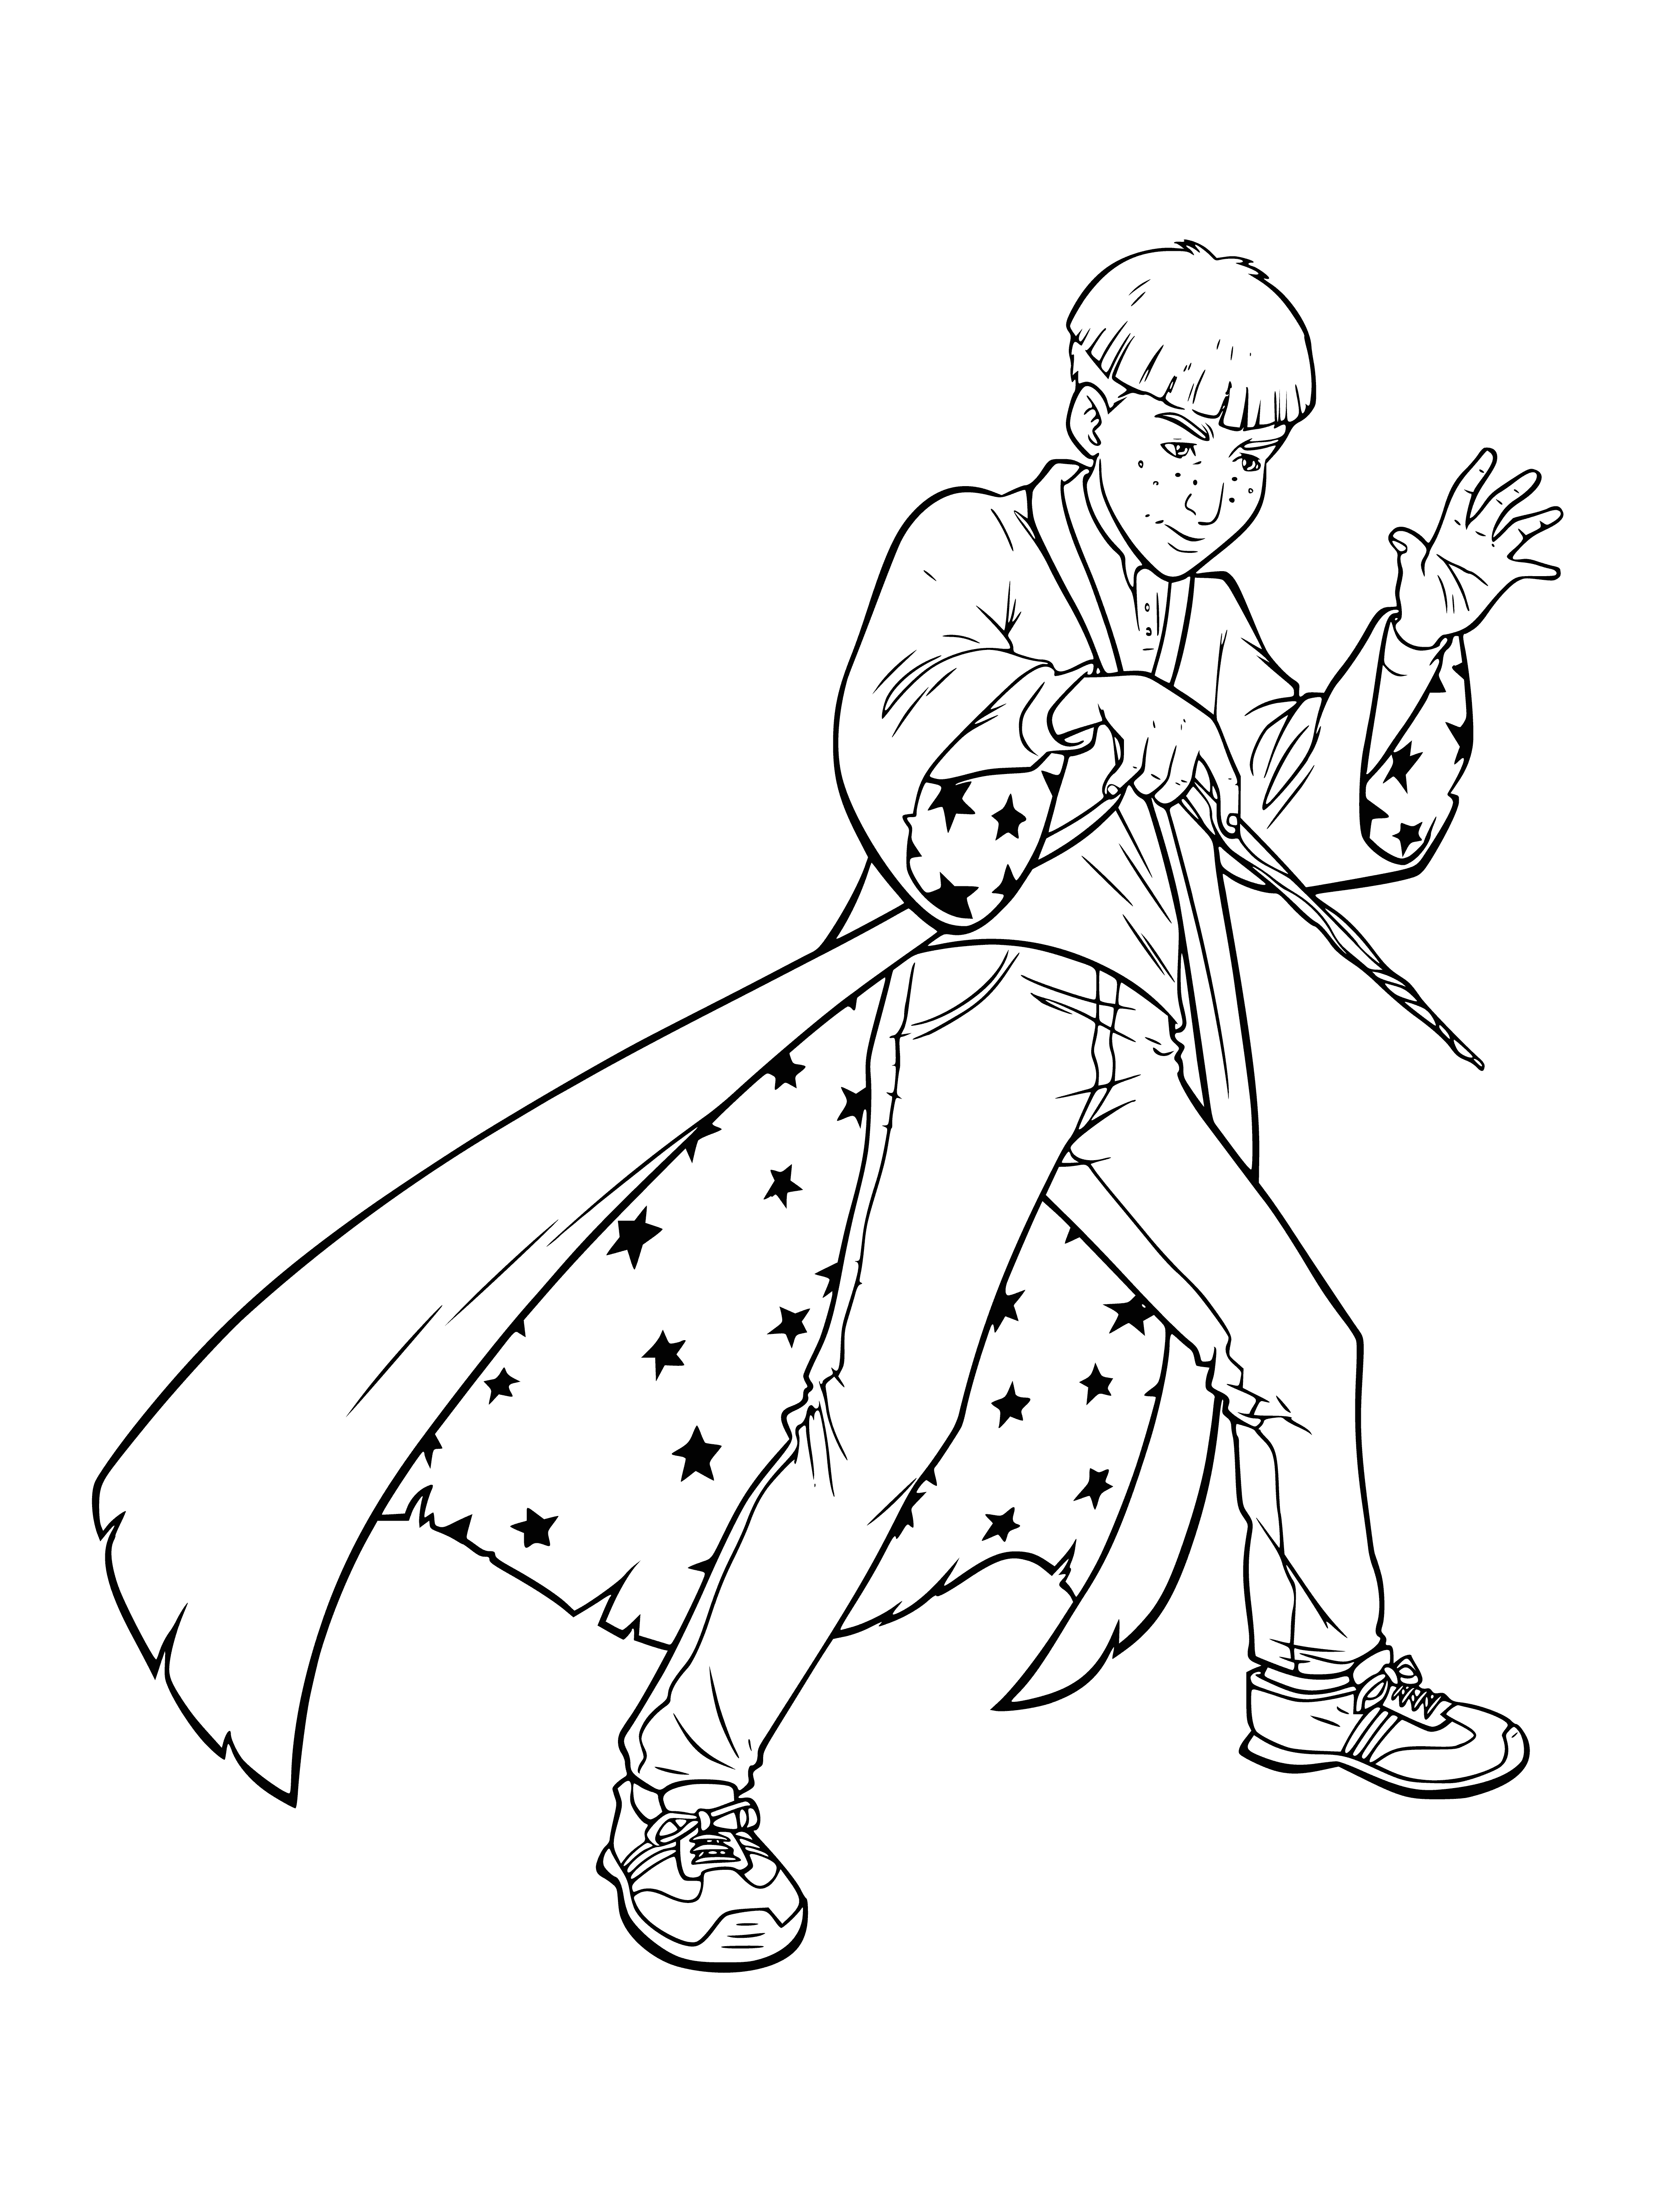 coloring page: Harry and Ron are ready to duel with their wands in a dark castle.